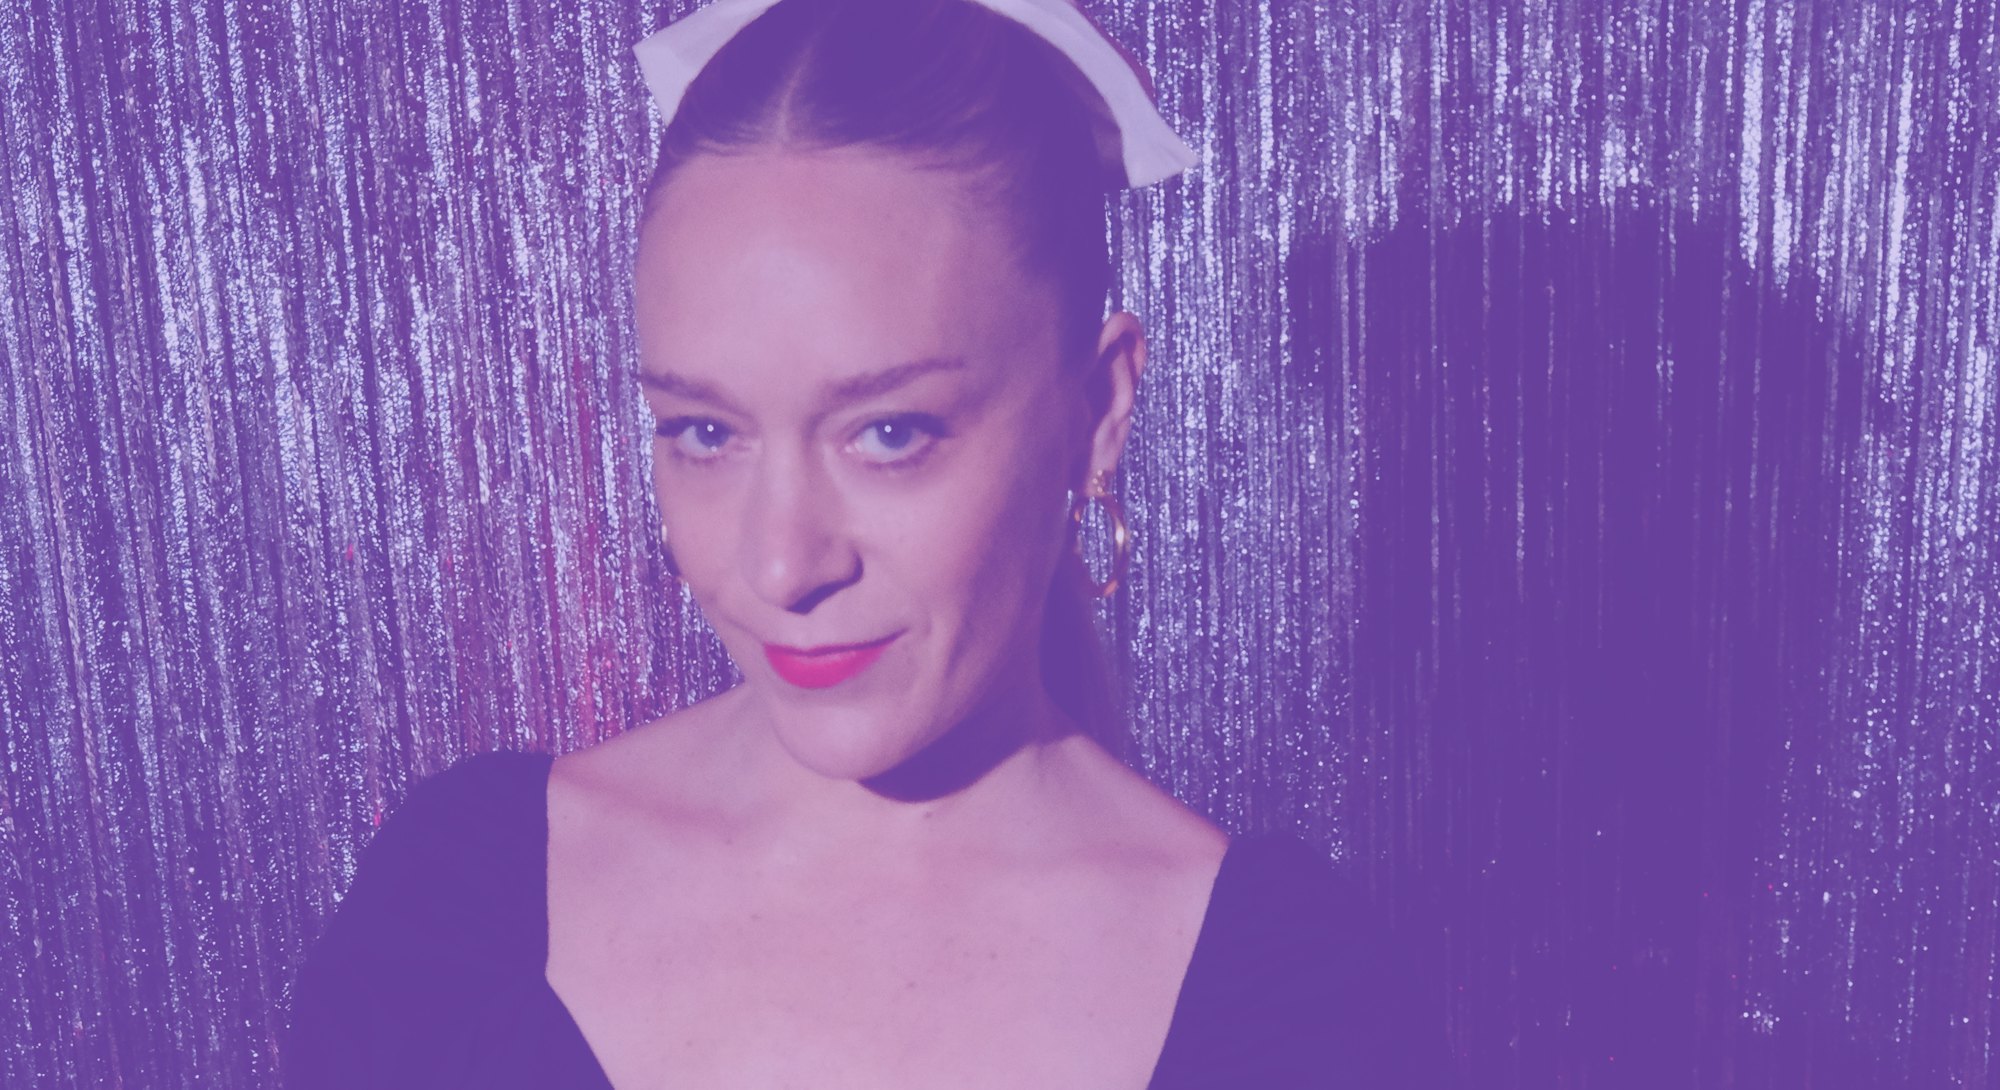 Chloë Sevigny celebrates H&M Williamsburg’s Holiday House Party, which she hosted with Anderson .Paa...